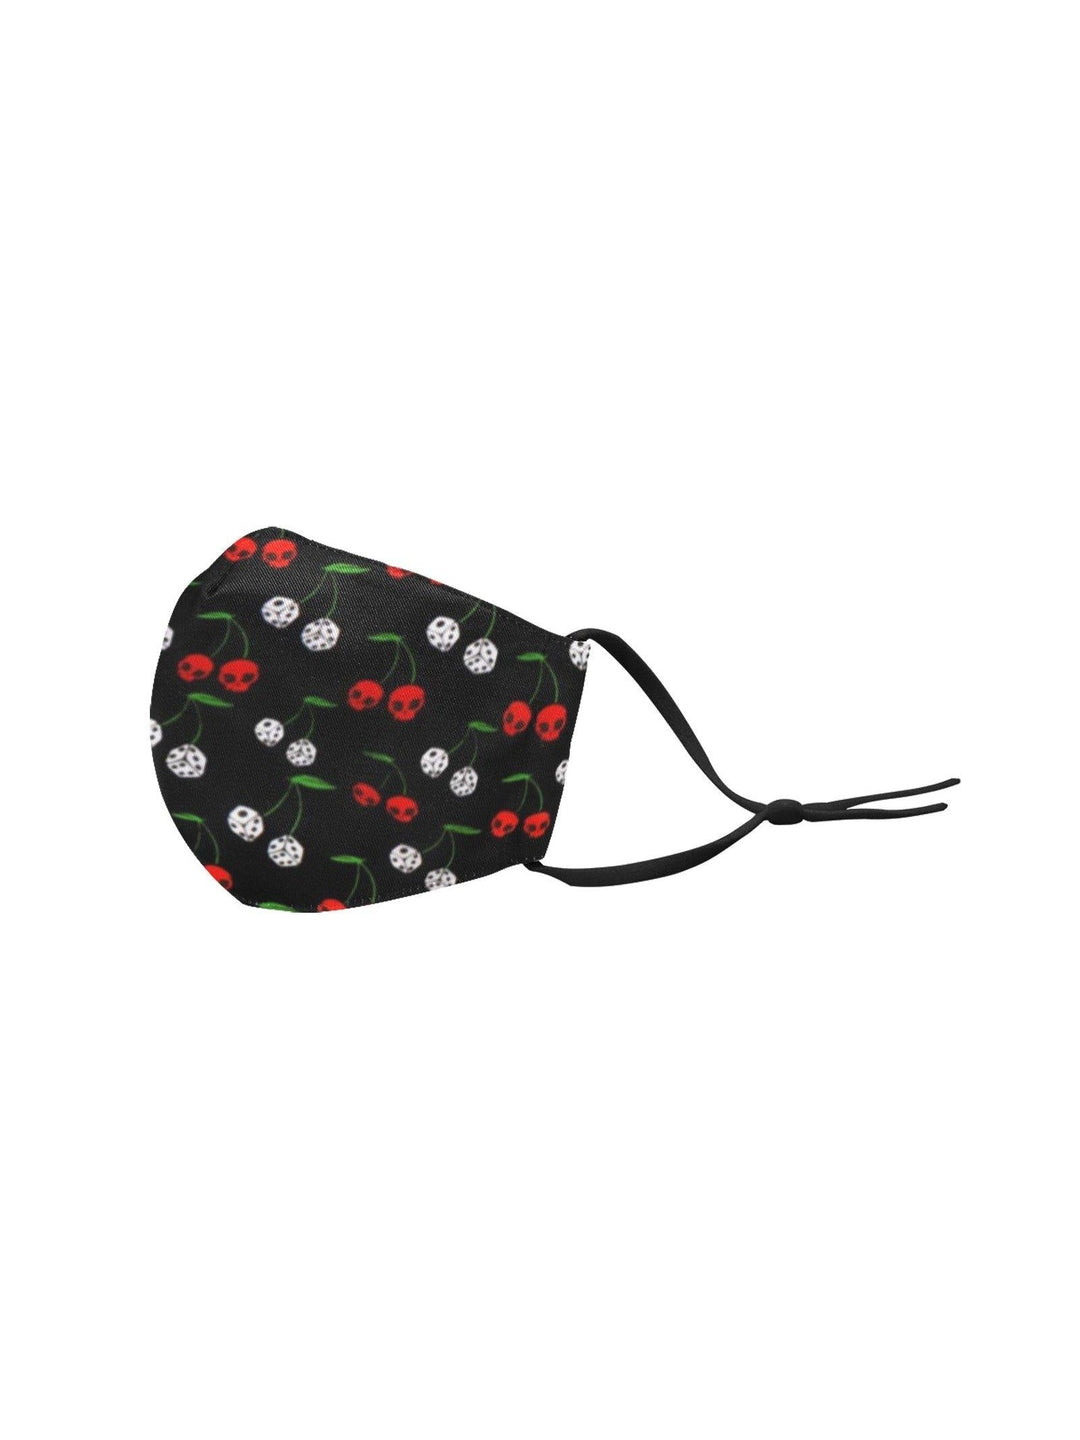 REUSABLE FACE MASKS WITH FILTERS - CHERRY SKULLS & DICE